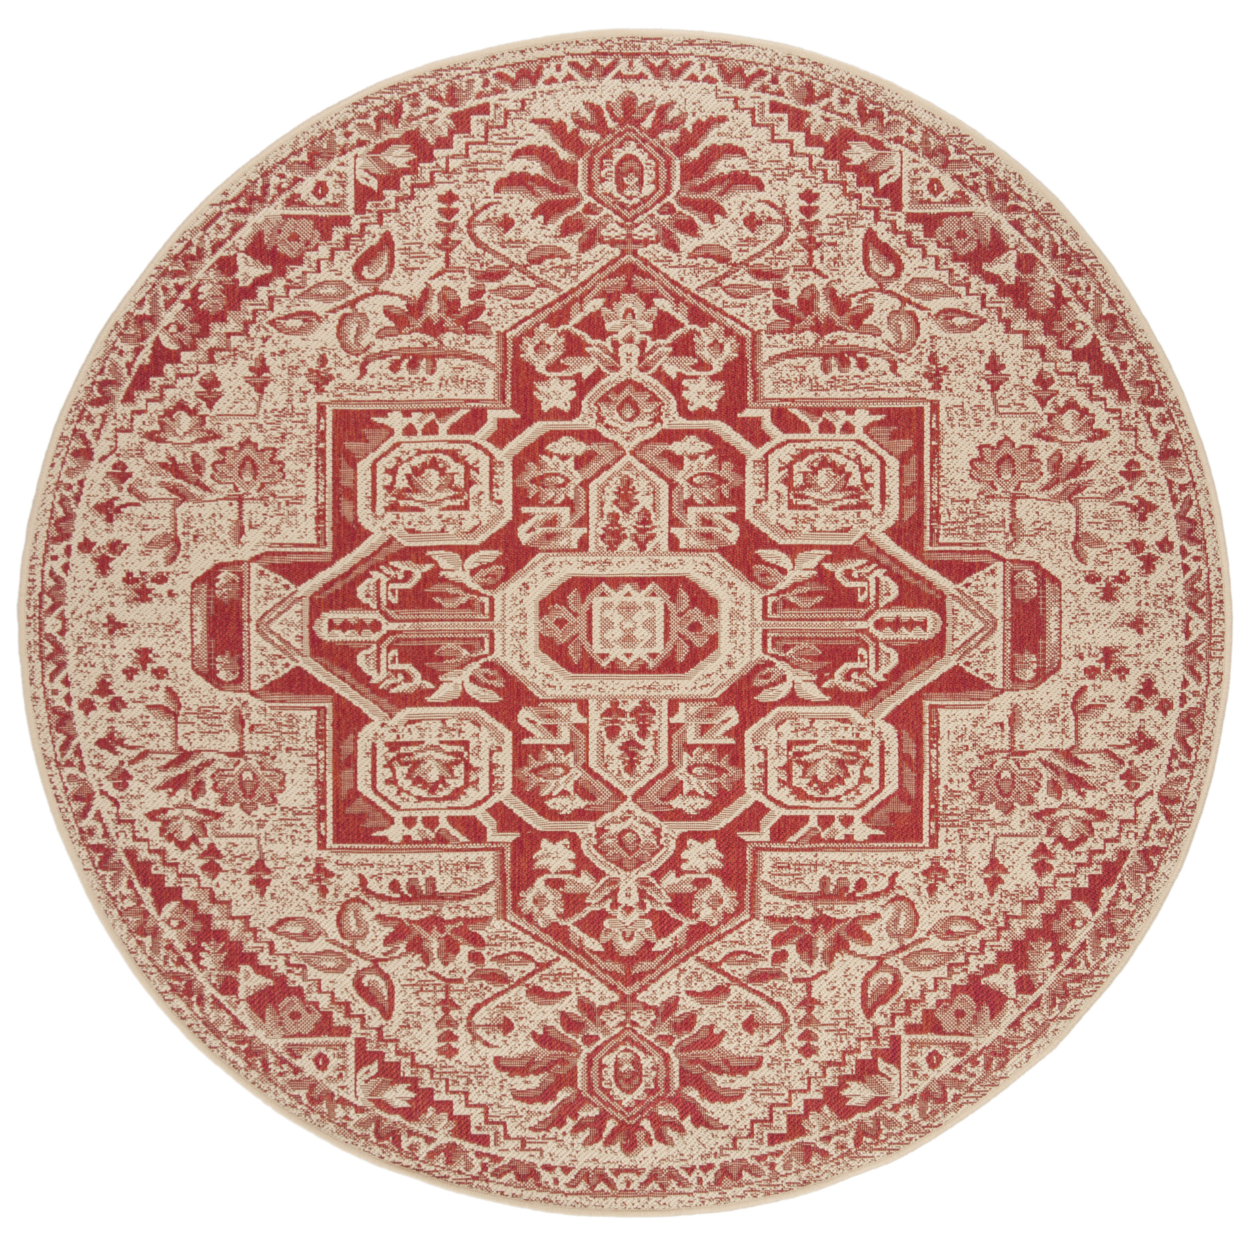 SAFAVIEH Outdoor LND138Q Linden Collection Red / Creme Rug - image 5 of 10